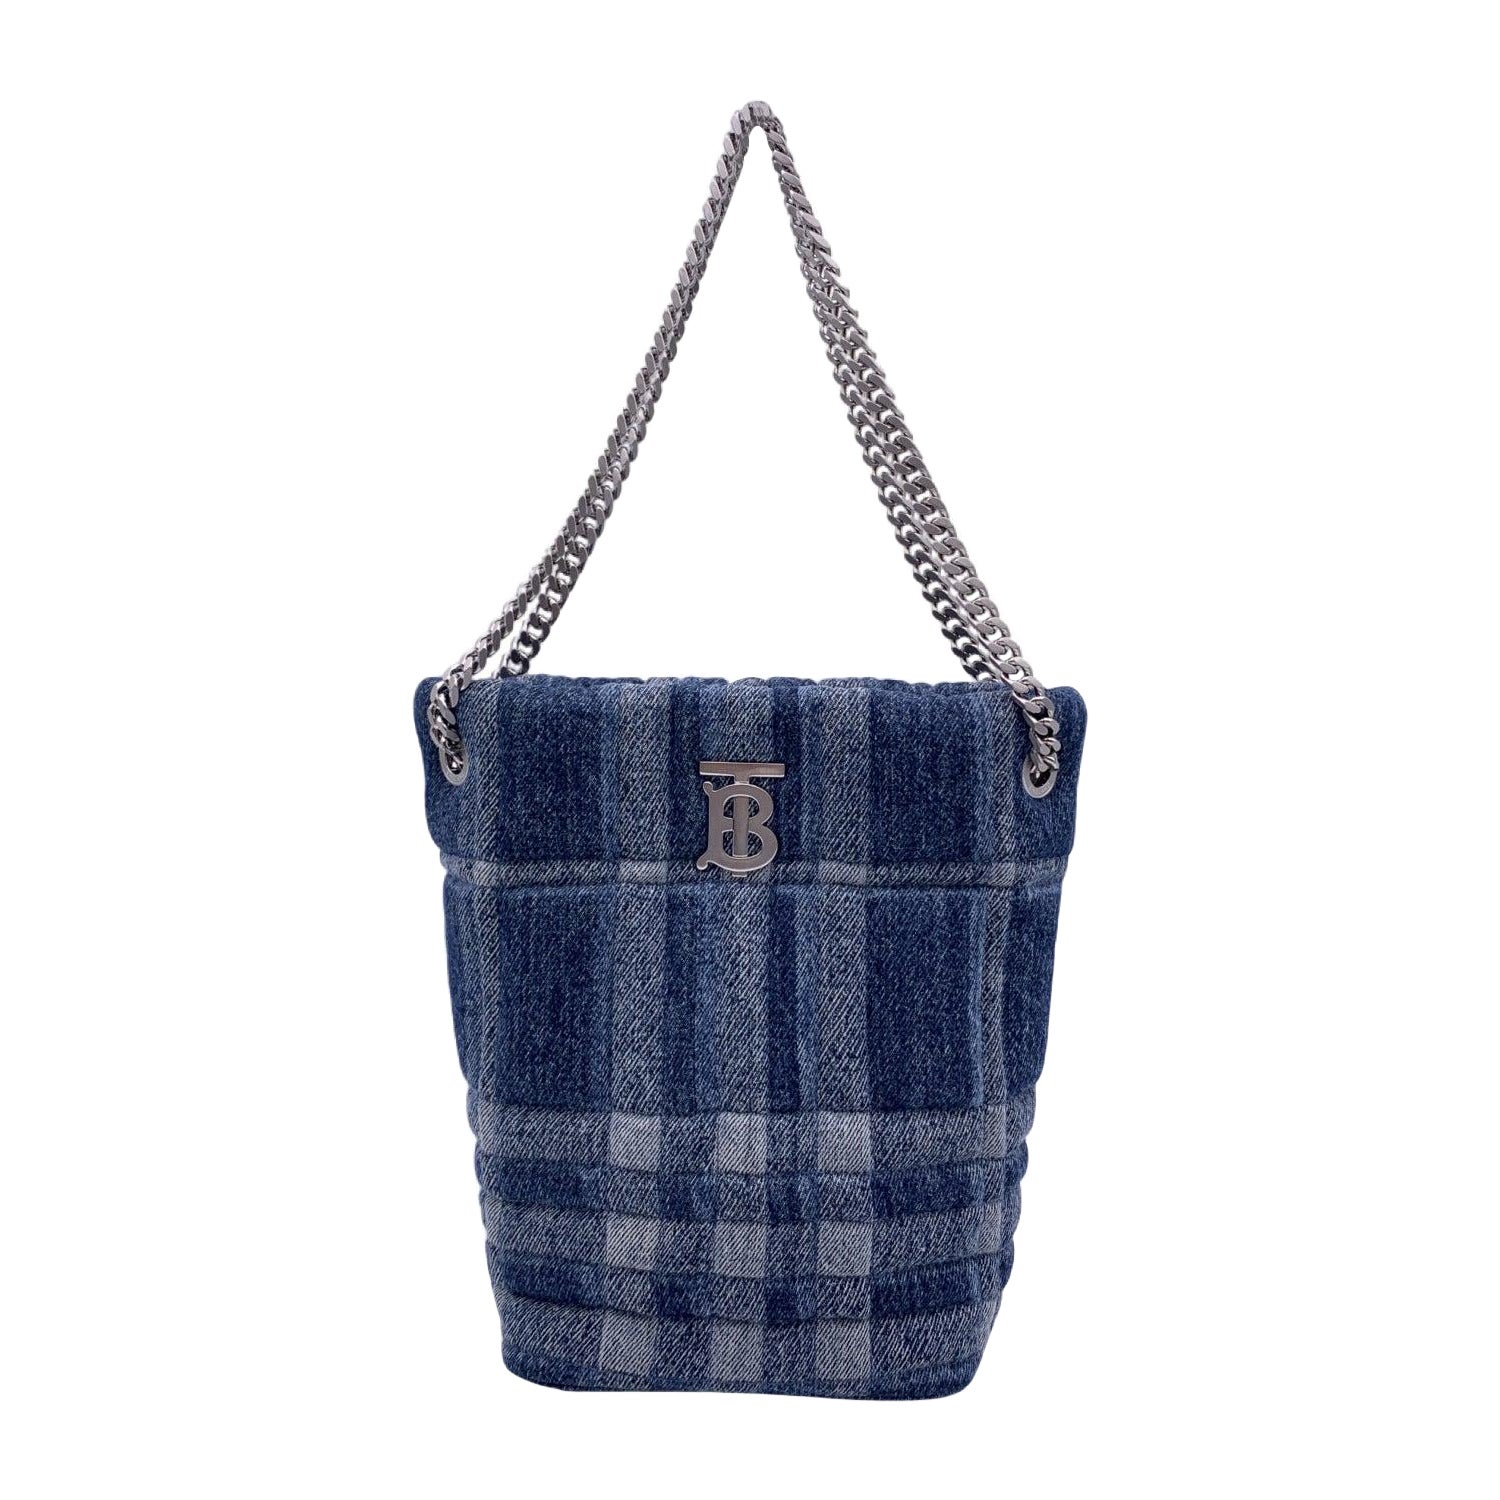 Burberry Blue Denim Quilted Small Lola Bucket Shoulder Bag Tote